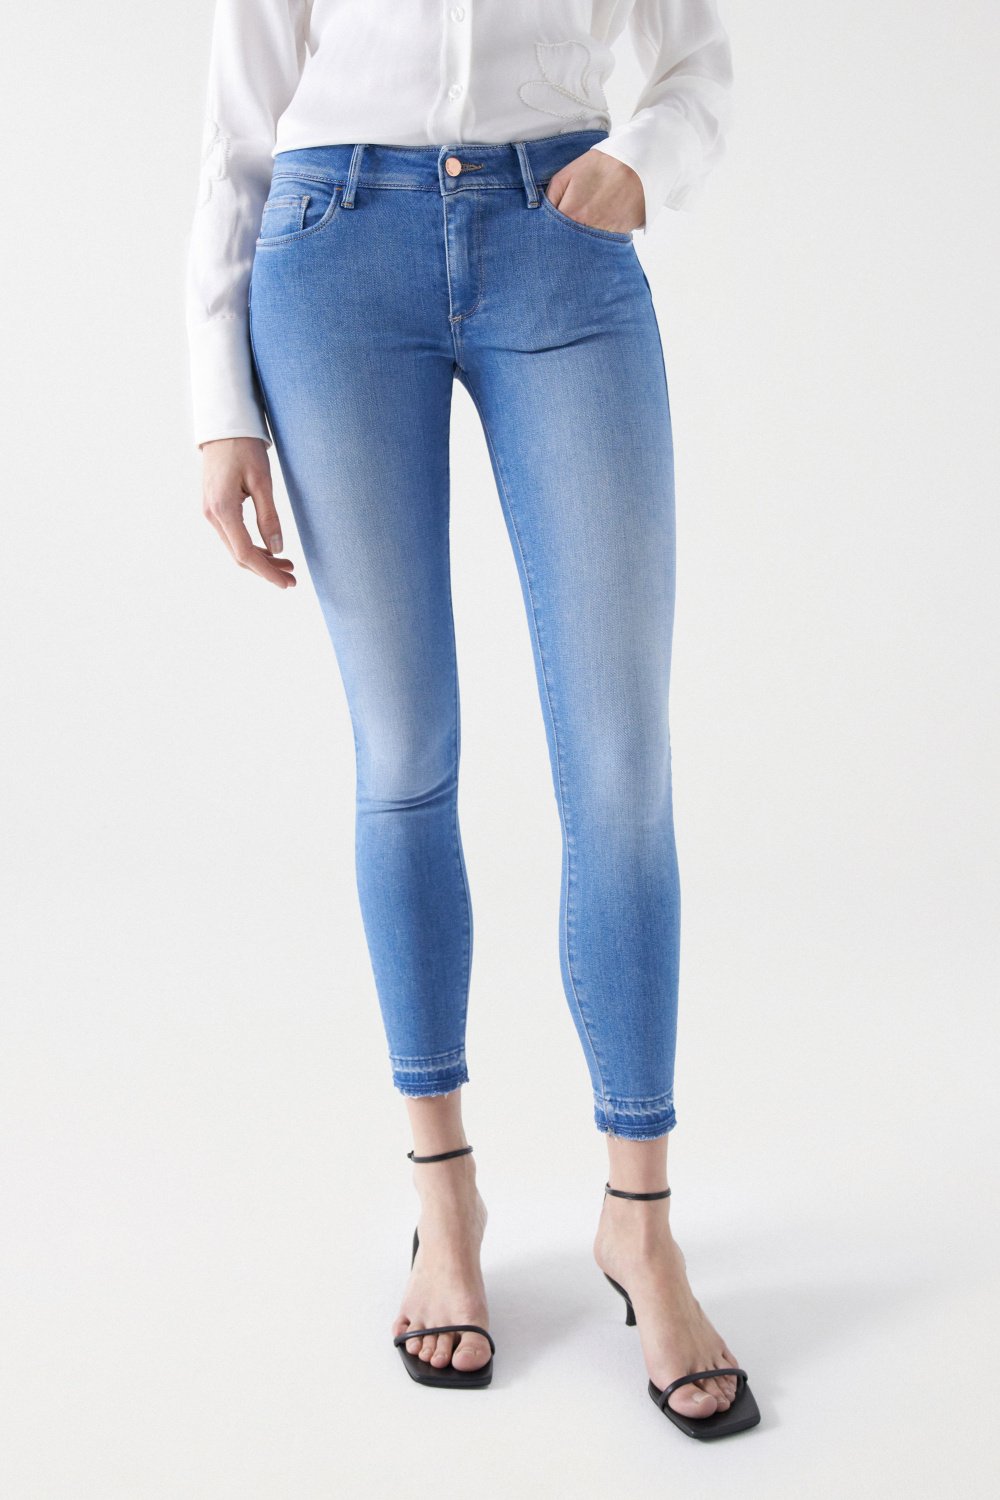 PushUp Jeans with details and double waist #Jeans #PushUp #Salsa